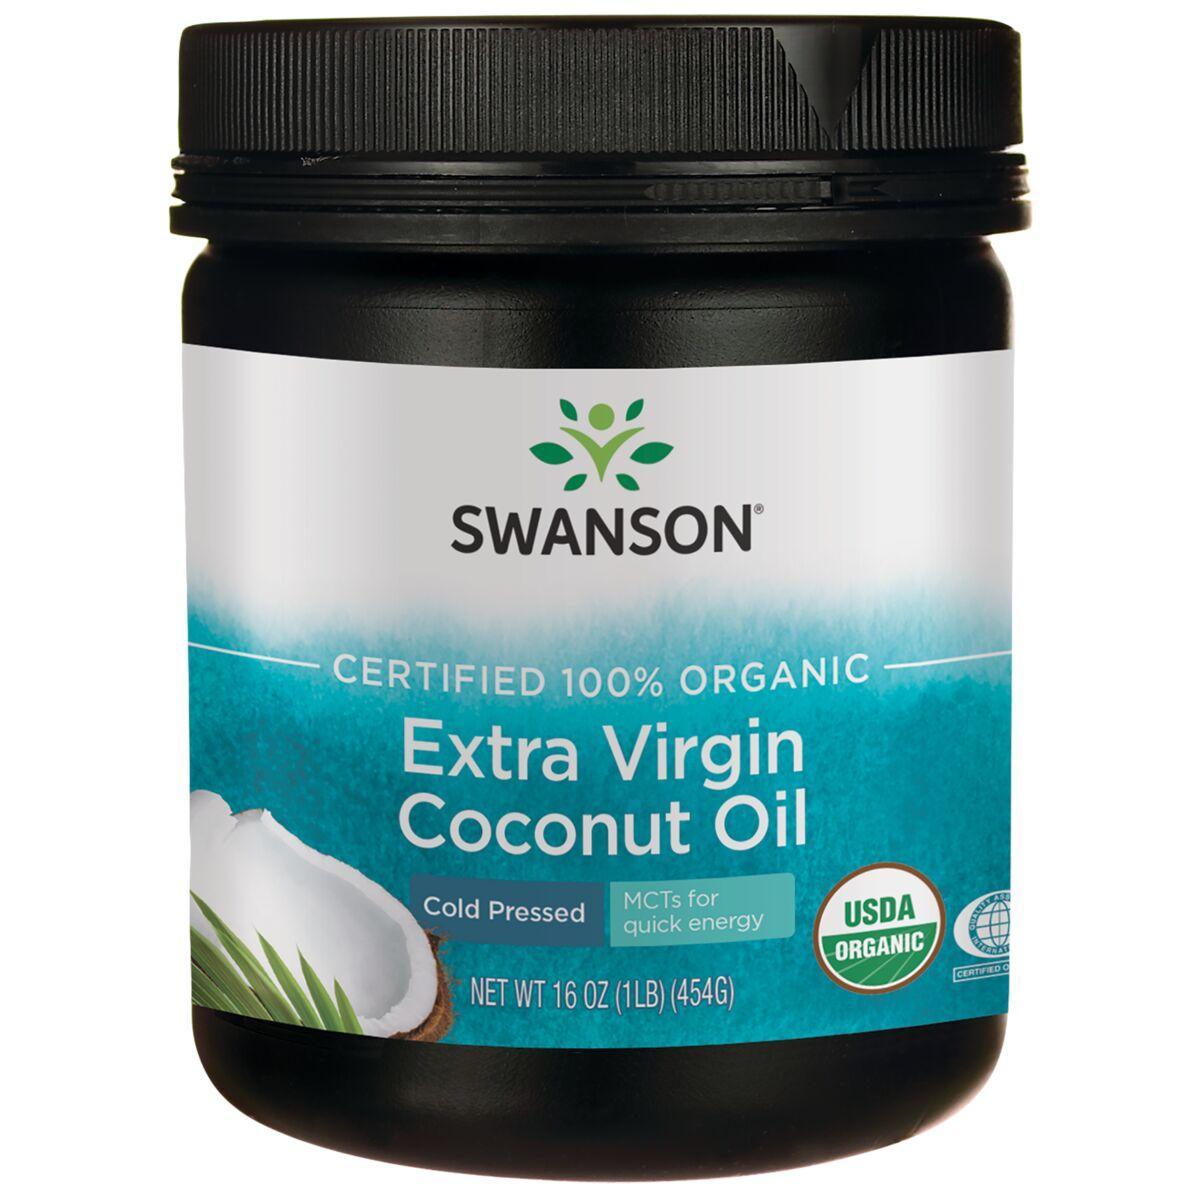 Swanson Organic Certified 100% Extra Virgin Coconut Oil -Cold Pressed | 16 oz Solid Oil